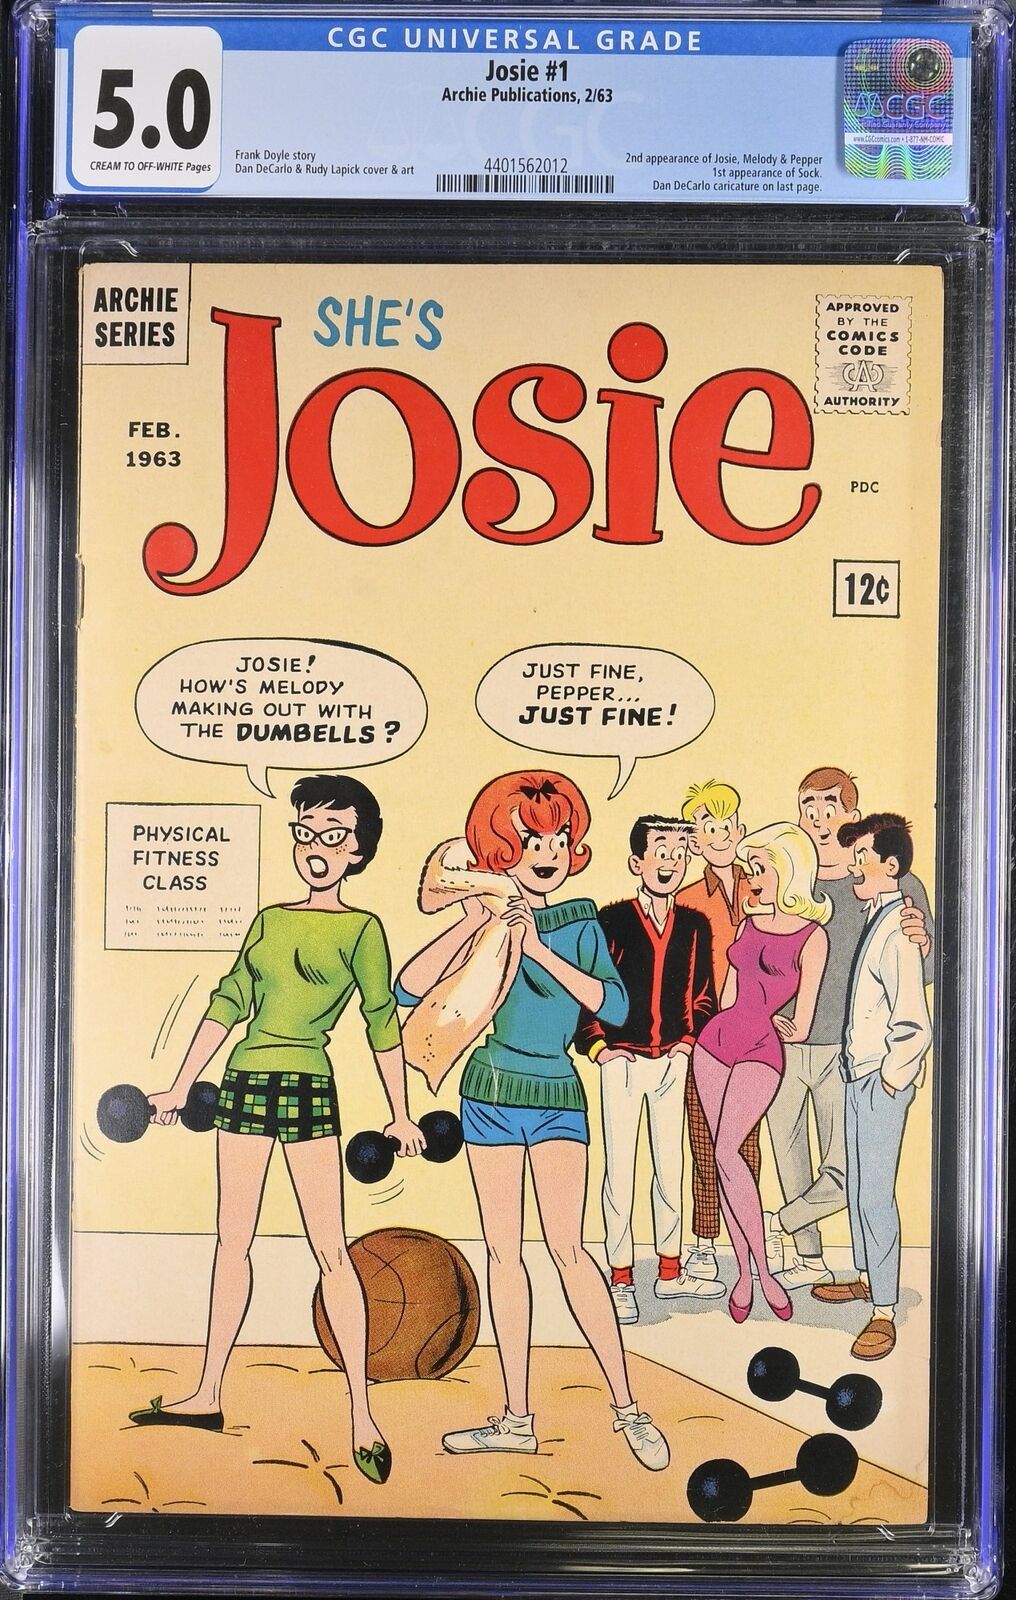 Josie and the Pussycats (1963) #1 CGC VG/FN 5.0 DeCarlo/Lapick Cover Archie 1963